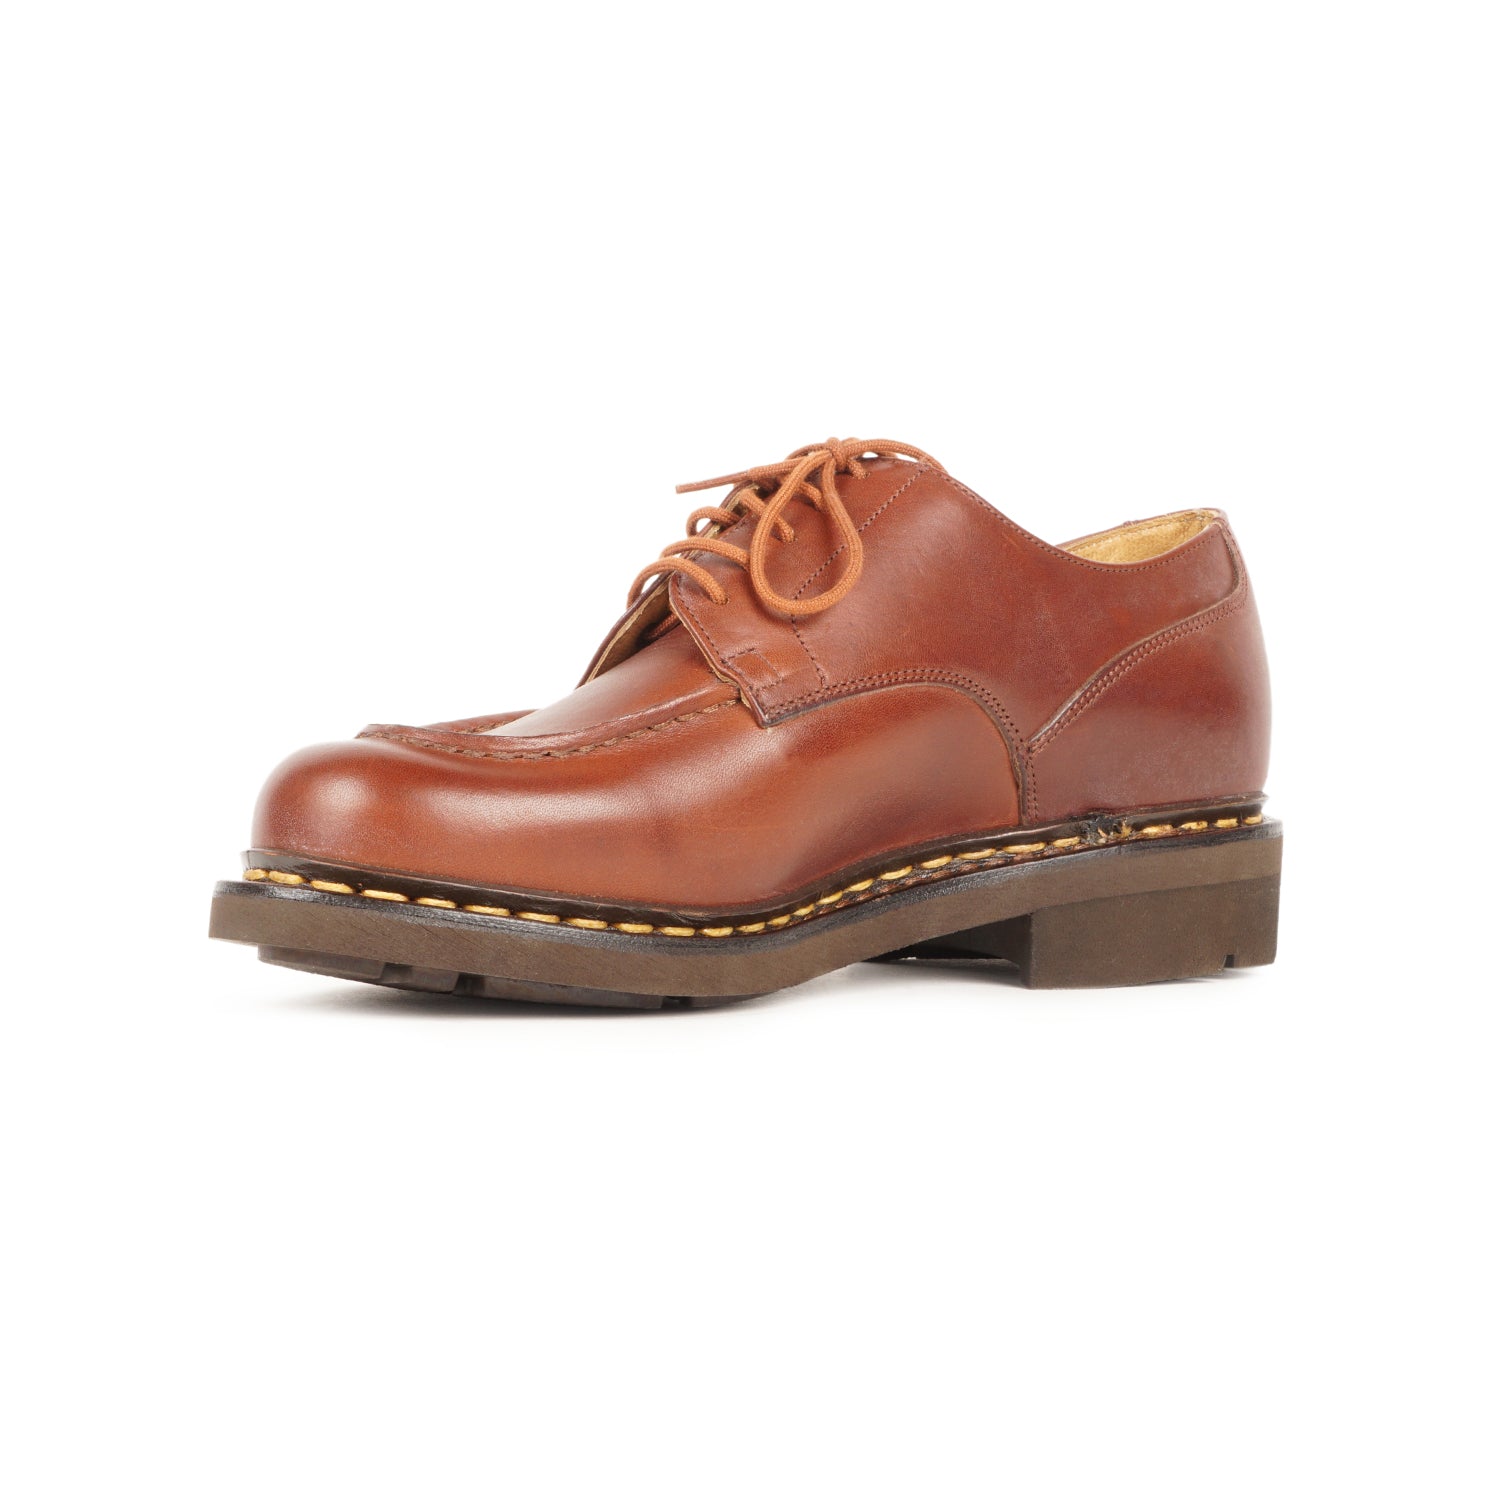 PARABOOT LEATHER SHOES